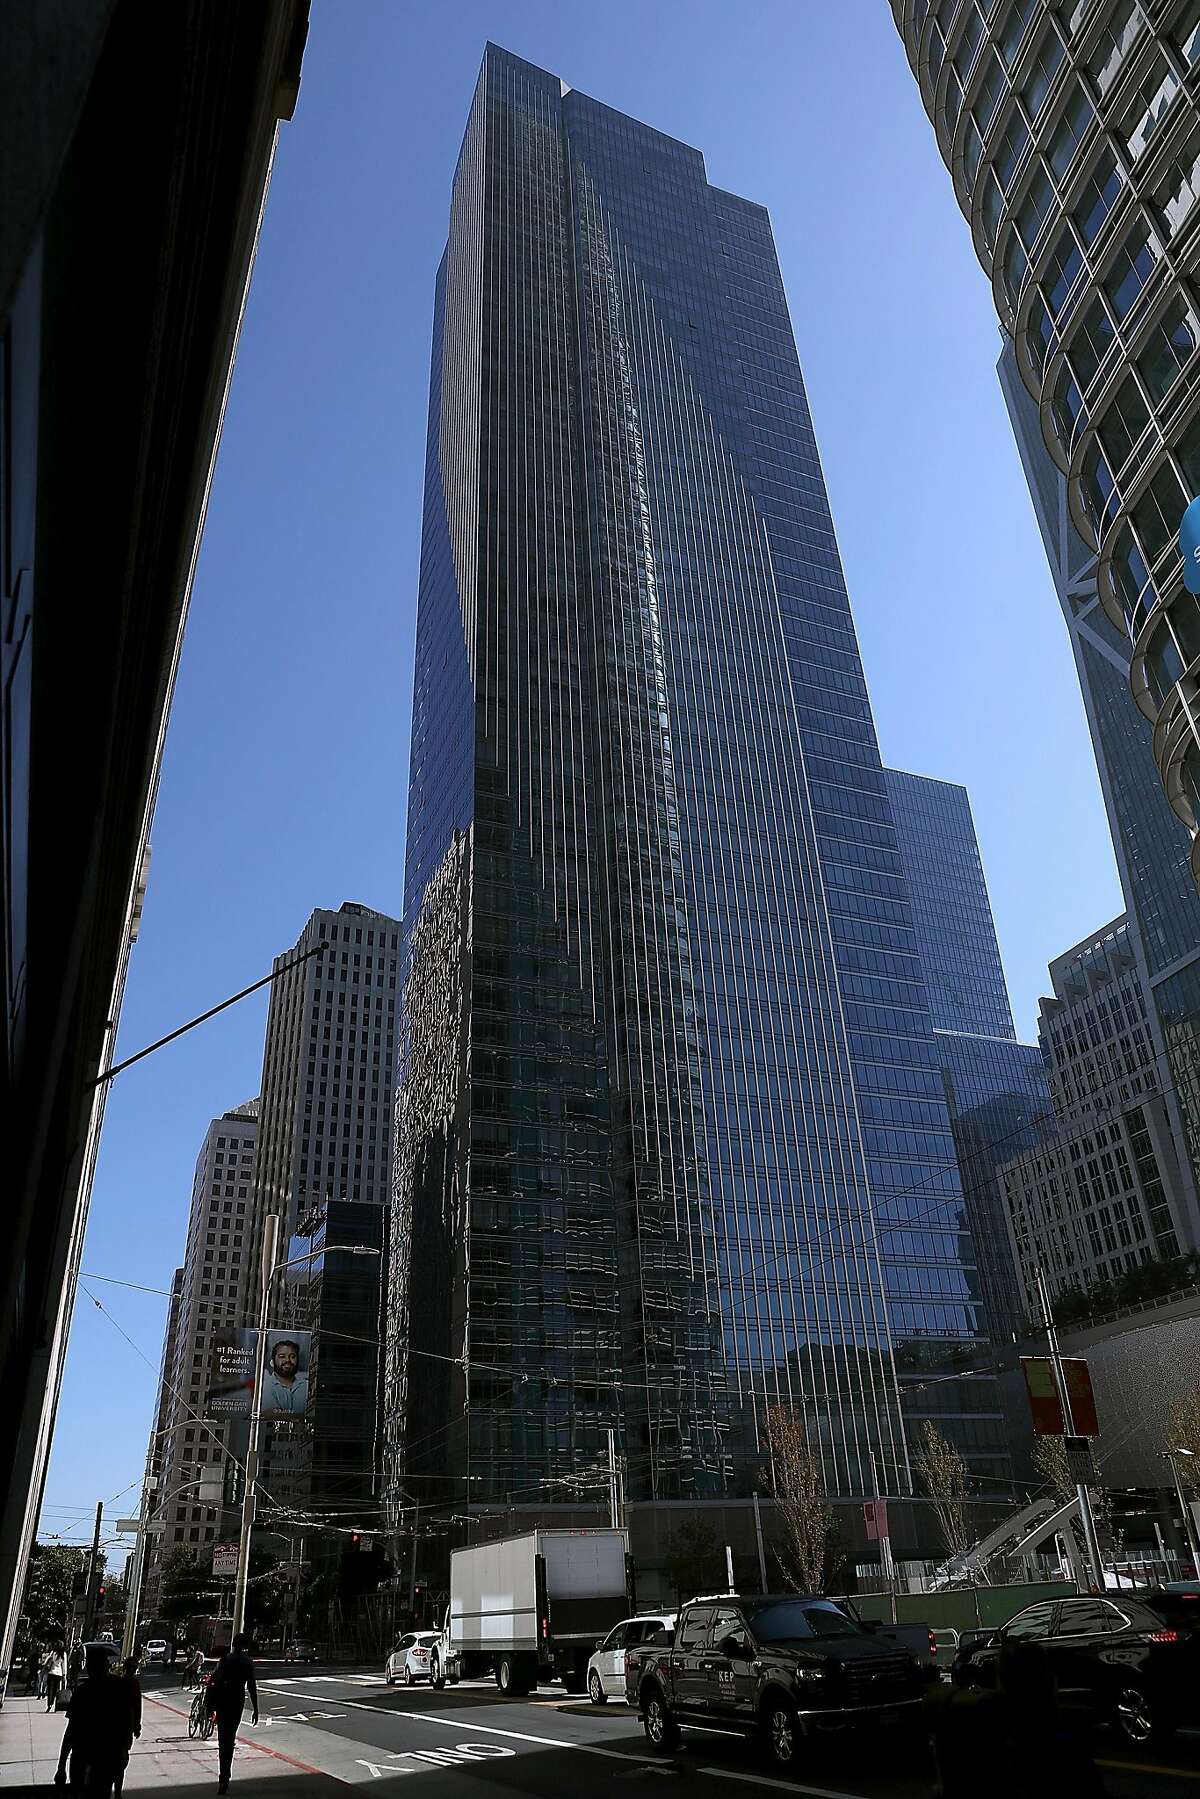 SAN FRANCISCO, CA - SEPTEMBER 10: A view of the Millennium Tower on September 10, 2018 in San Francisco, California. A cracked window on the 36th floor of the beleaguered Millennium Tower in San Francisco is the latest problem for the tower that has sunk over 16 inches into the ground and is leaning more than two inches to the northwest. The 58-story, 419-residence building was completed in 2009. (Photo by Justin Sullivan/Getty Images)